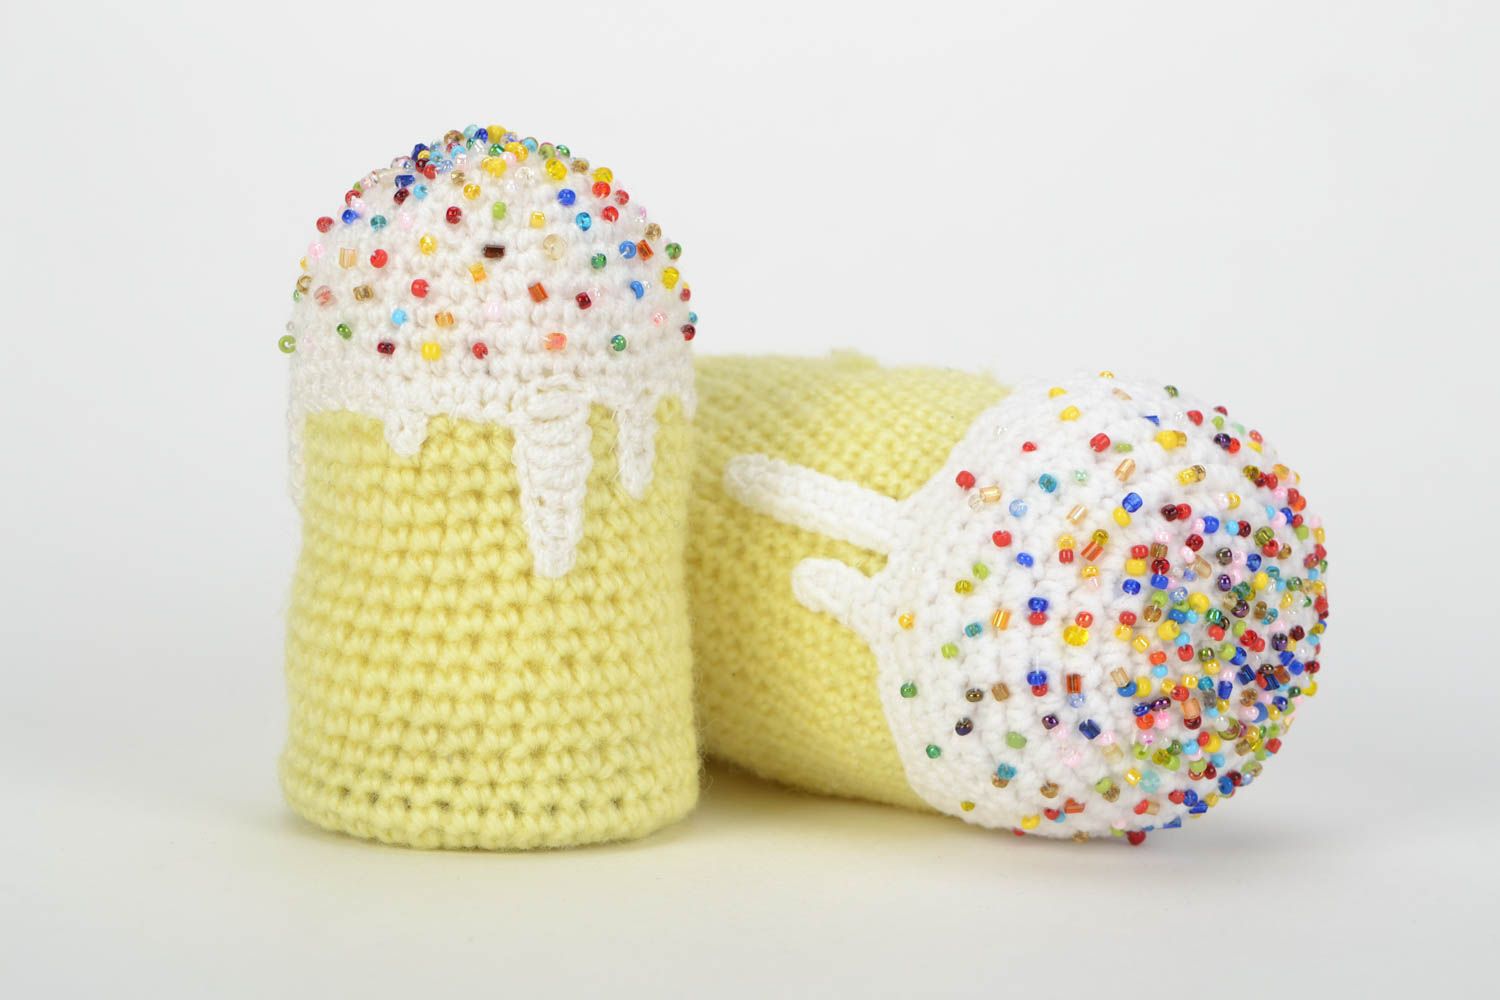 Set of homemade crochet Easter cakes 2 pieces holiday home decor photo 3